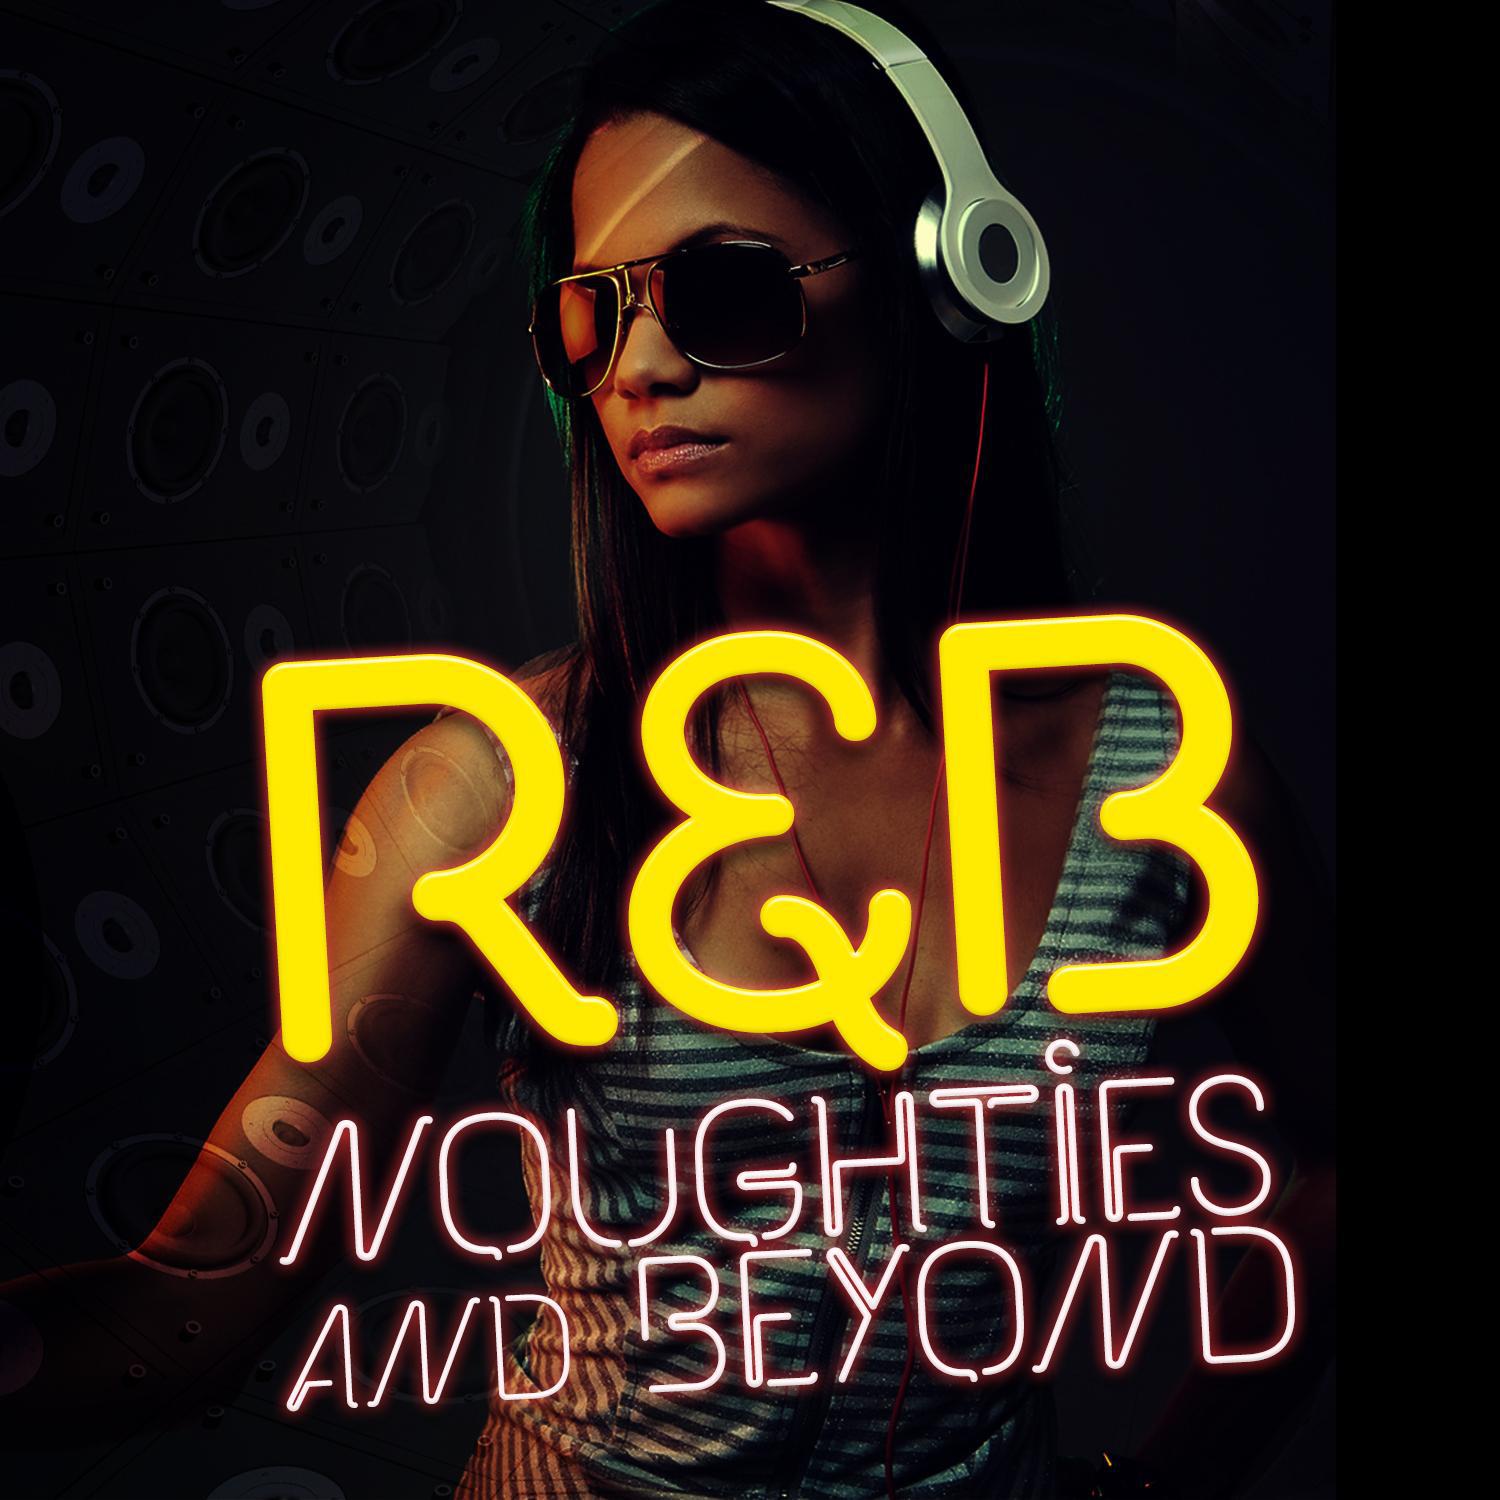 Best Rnb: Noughties and Beyond